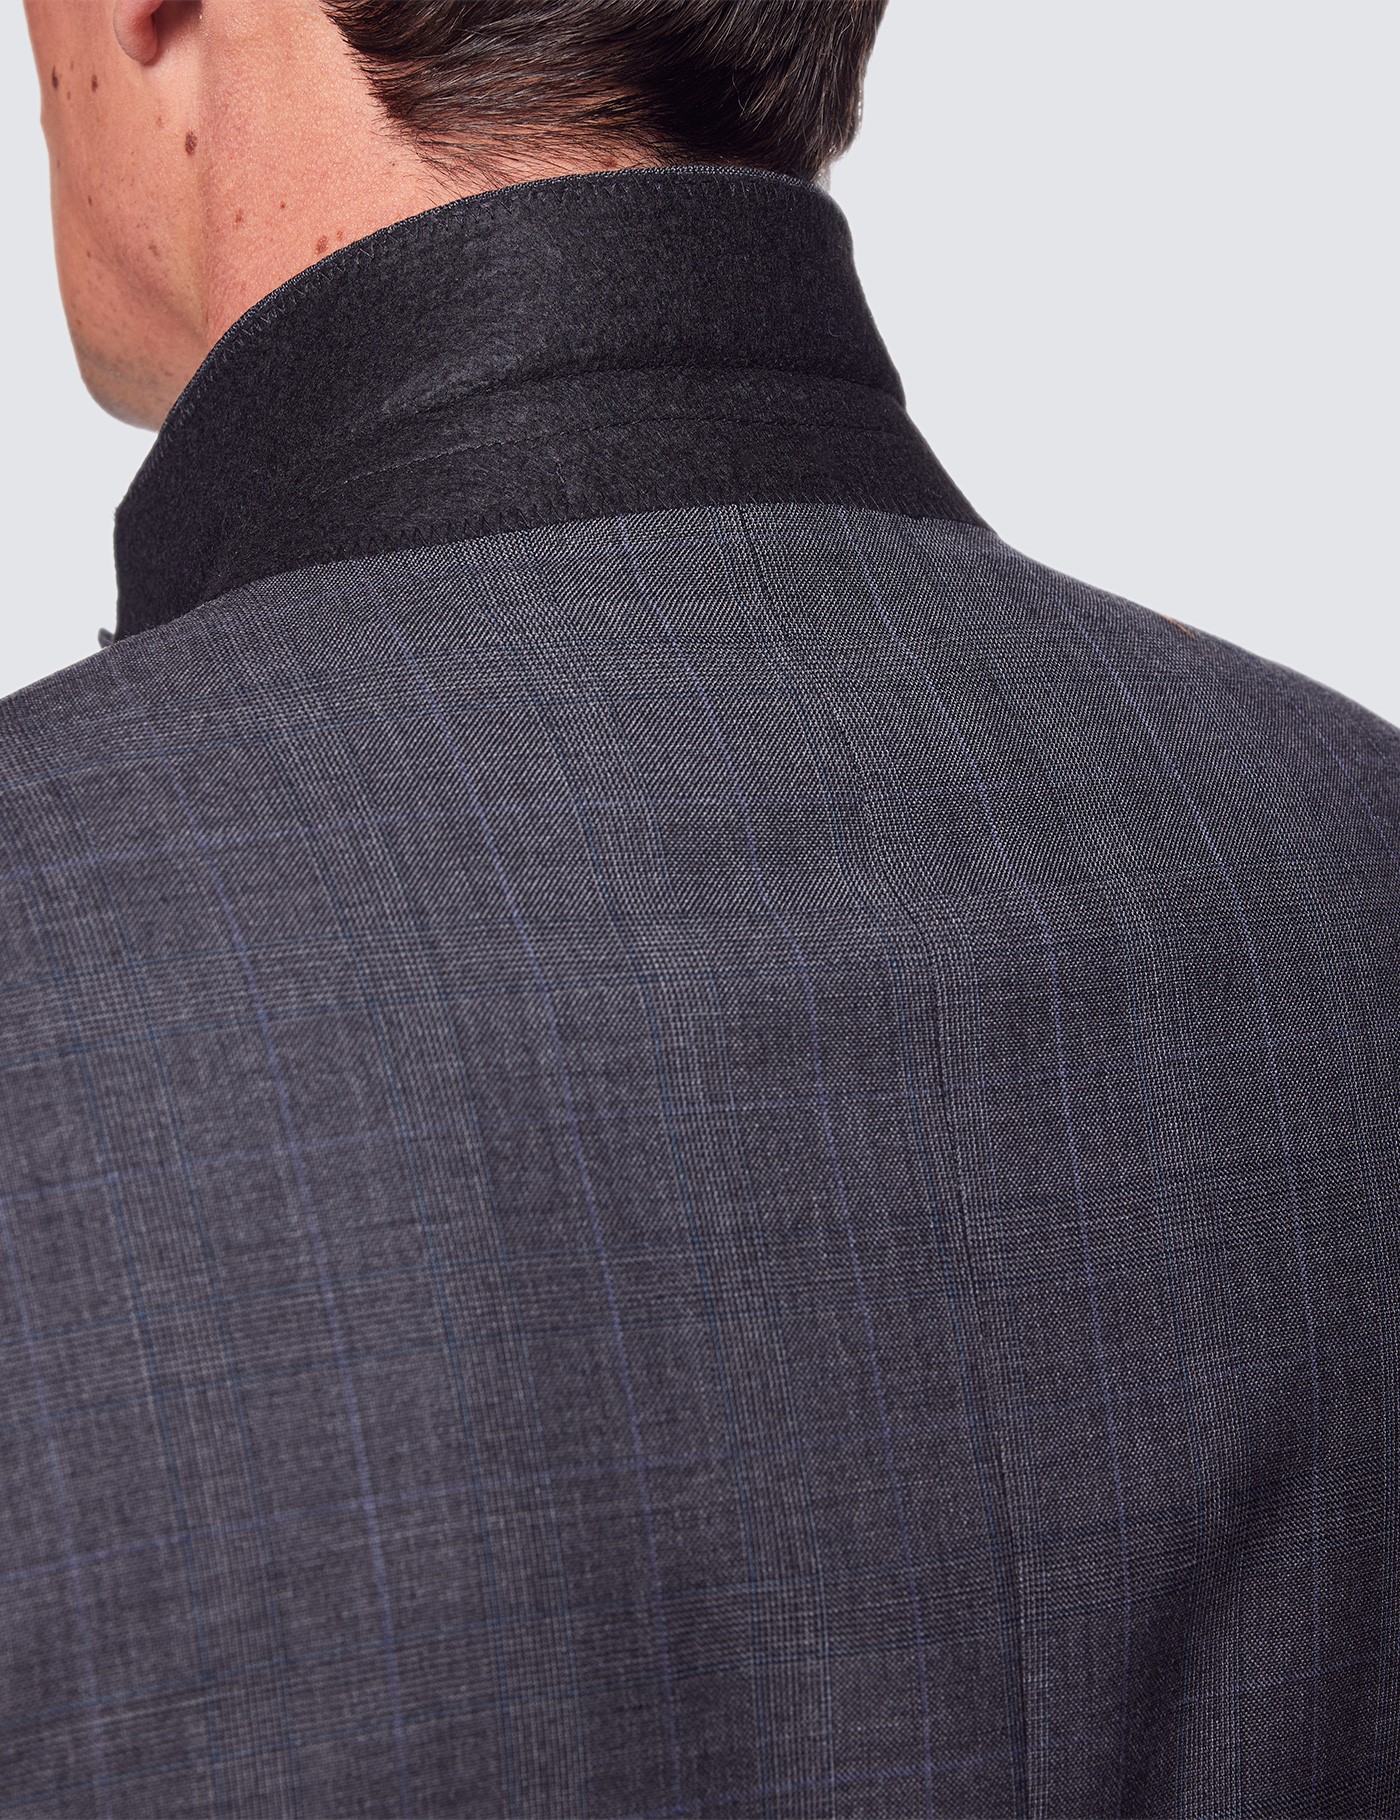 Men's Grey & Blue Prince of Wales Check Classic Fit Suit Jacket | Hawes ...